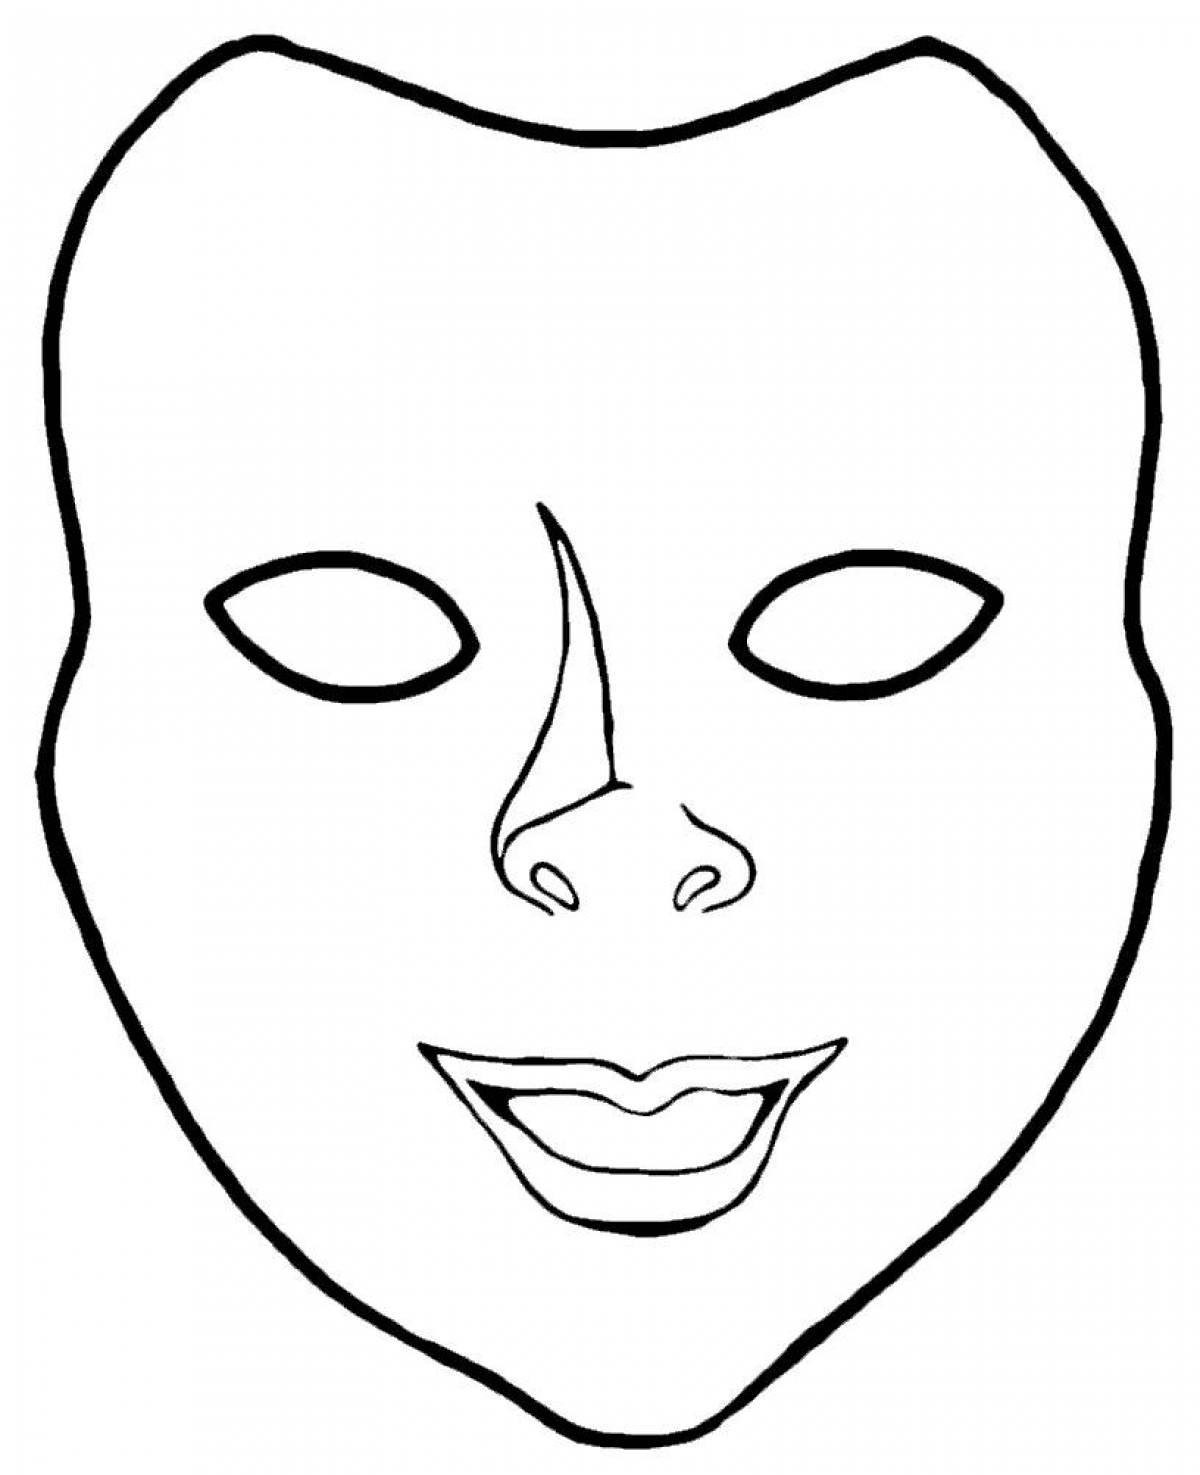 Fun face mask coloring page